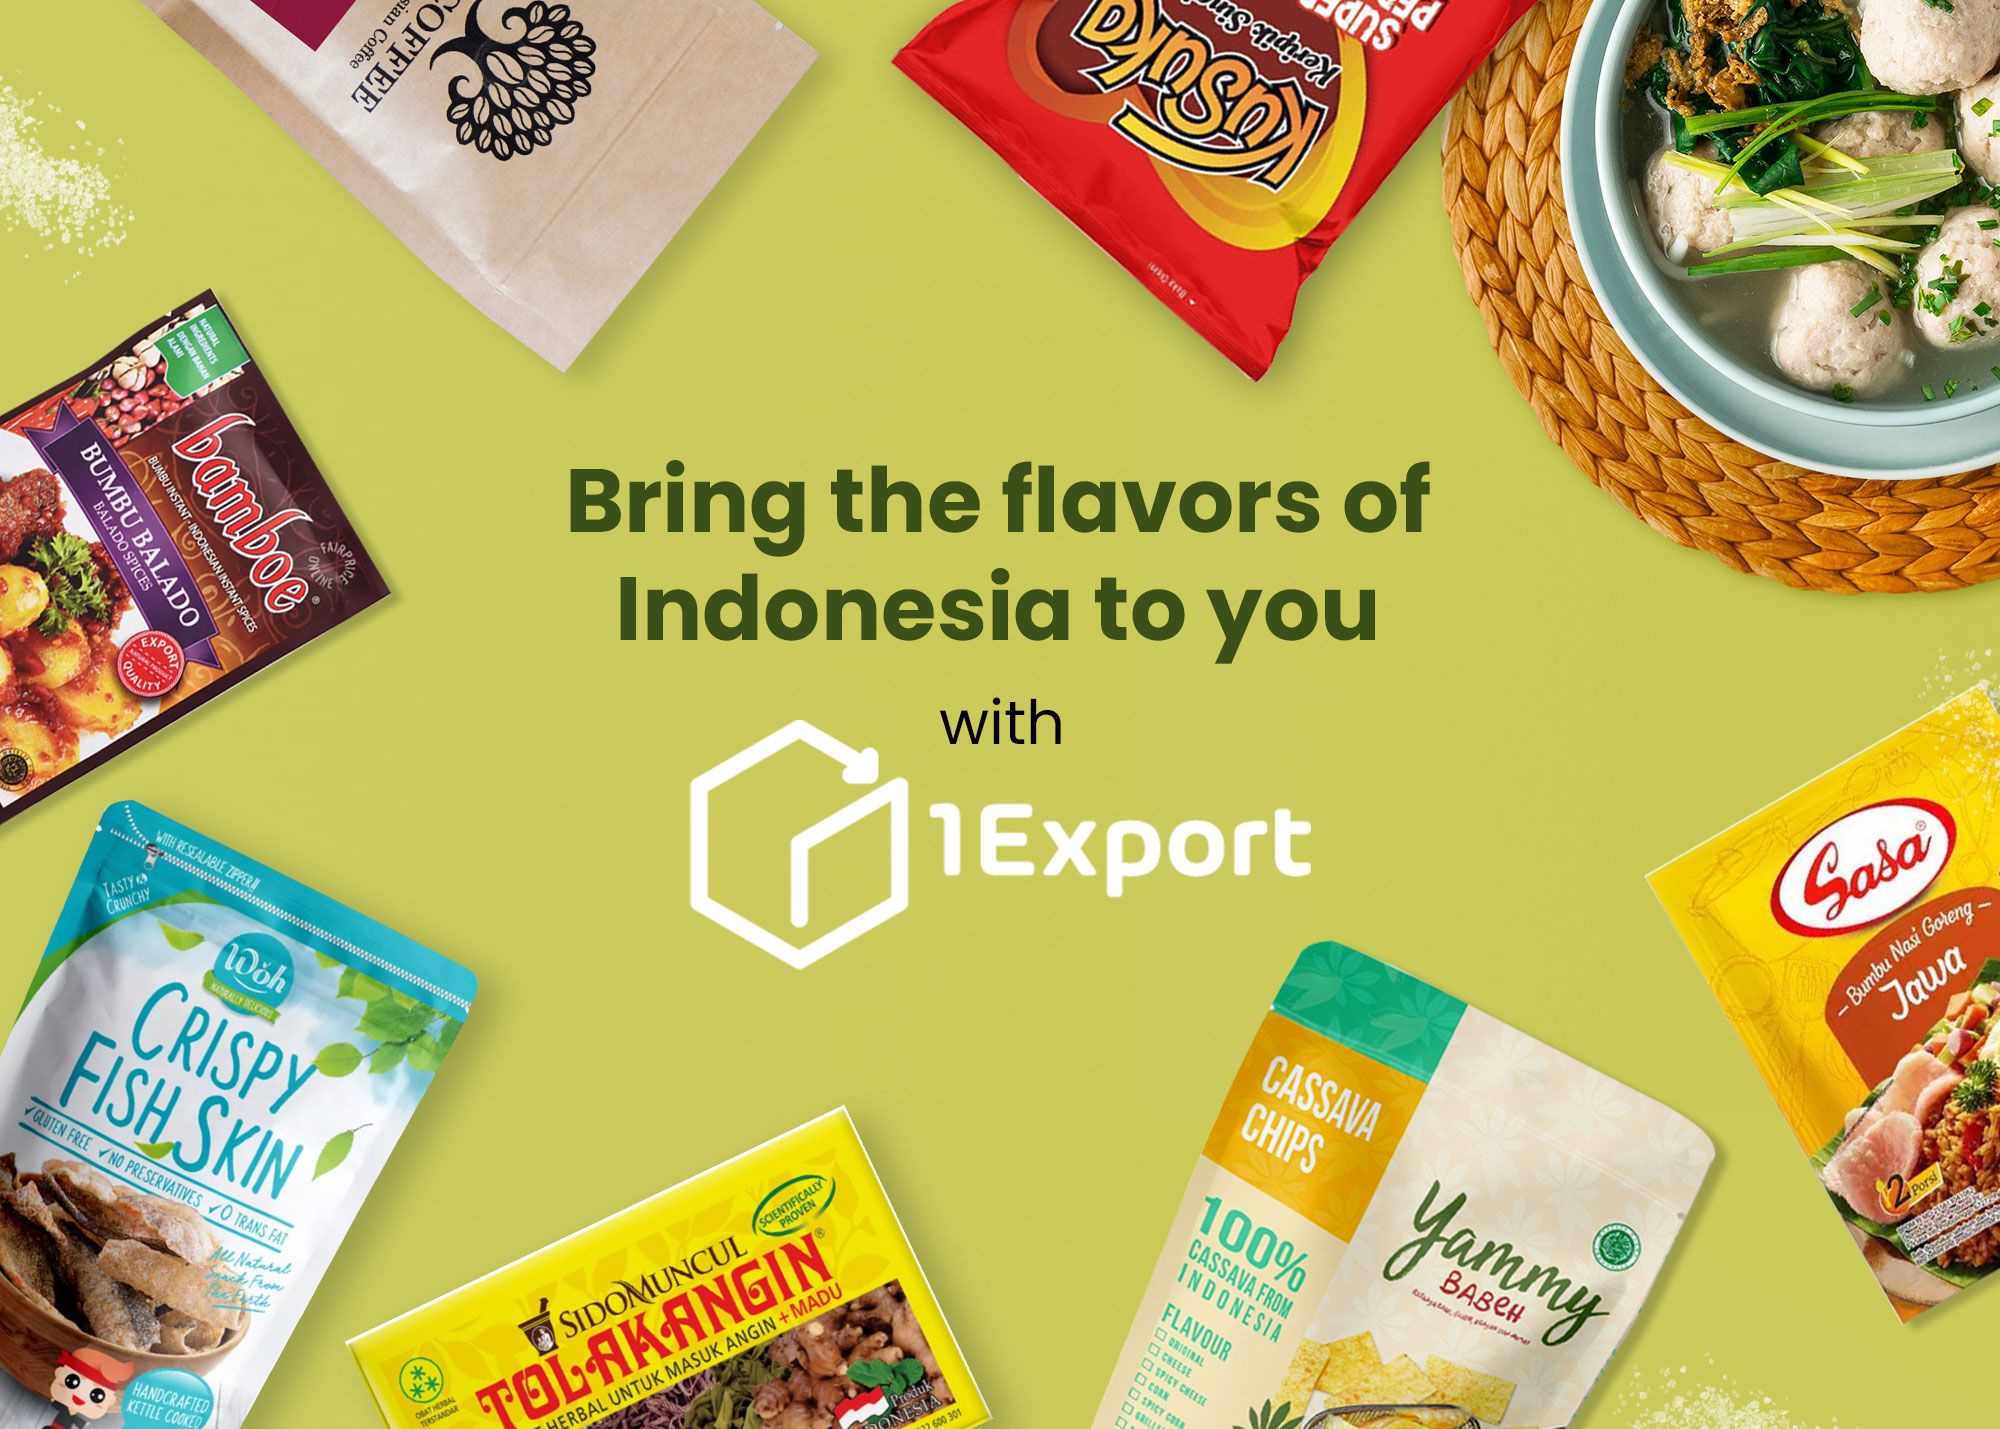 Bring the flavors of Indonesia to you with 1Export